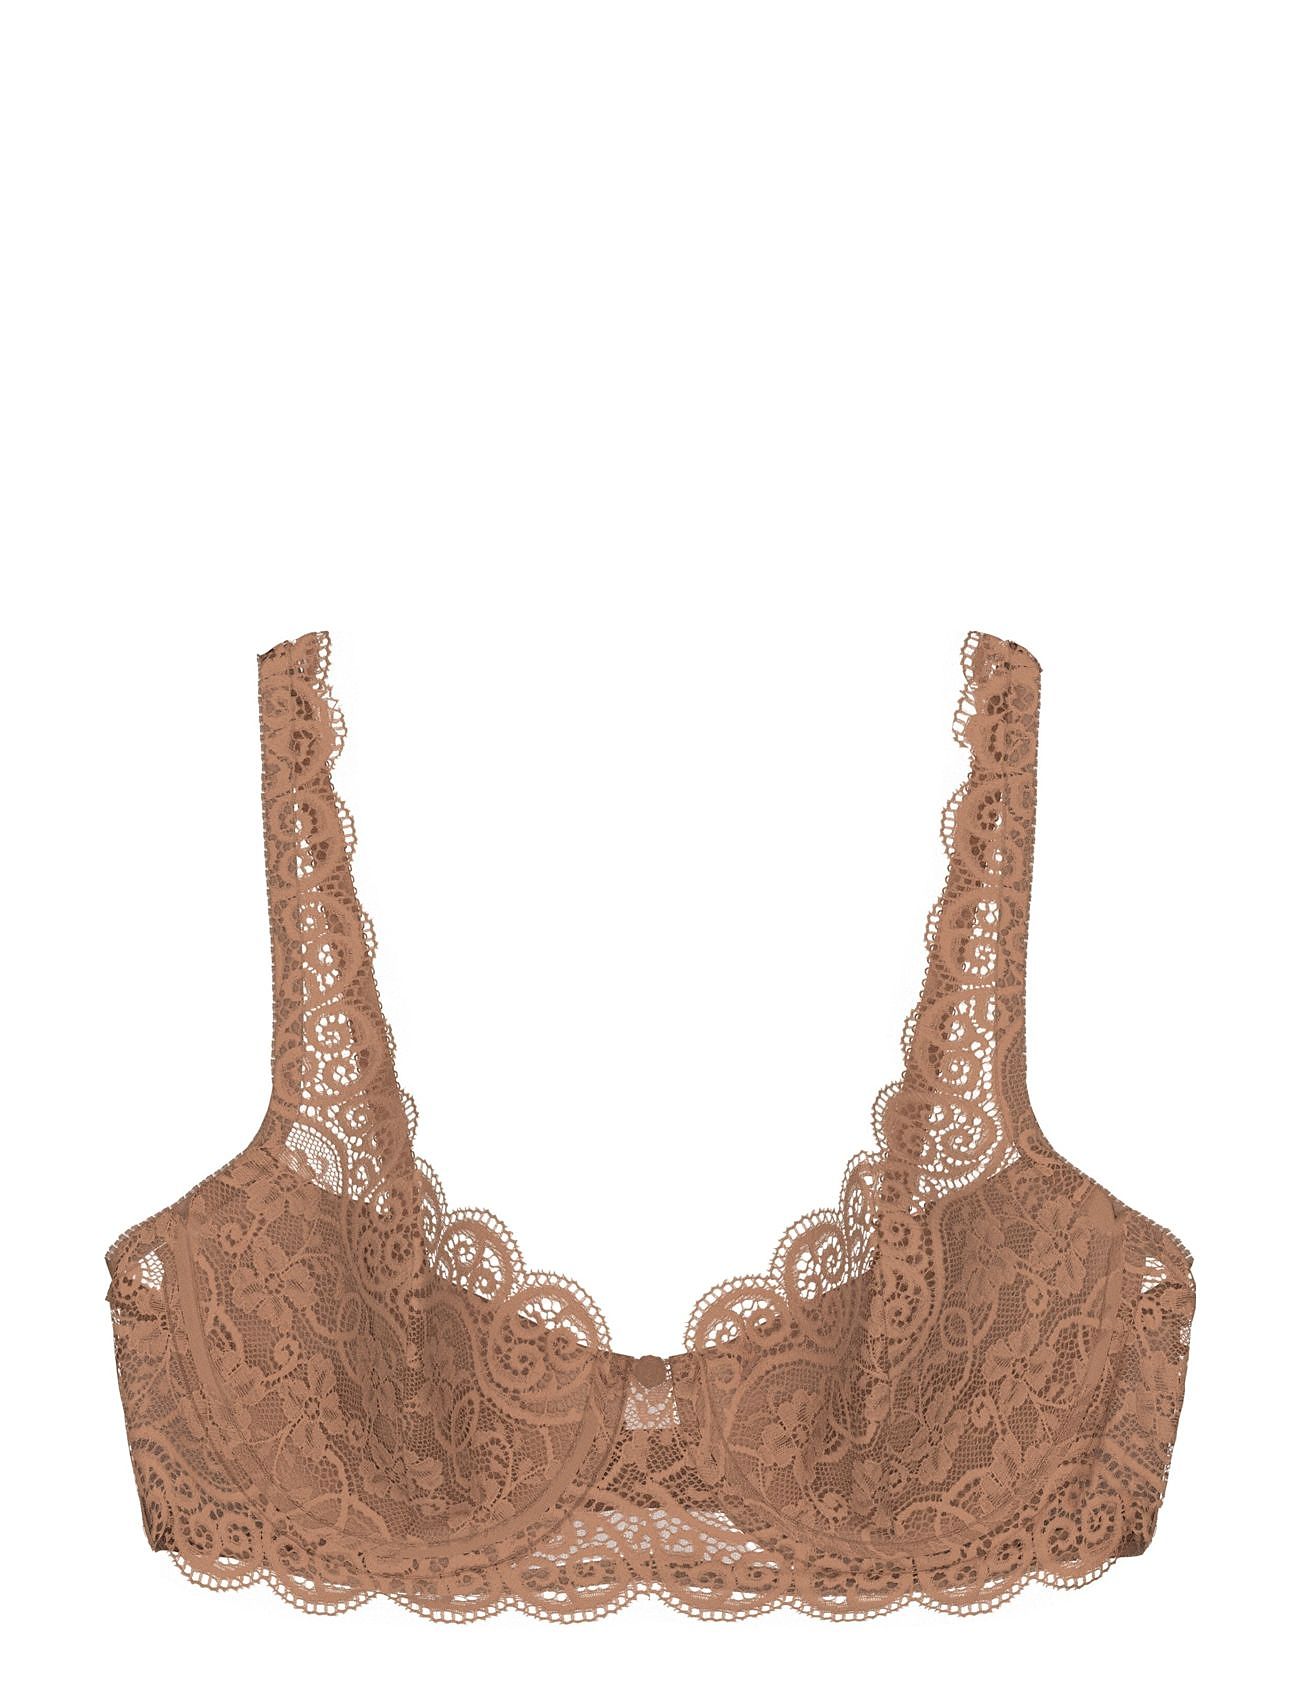 Amourette 300 Whp X Lingerie Bras & Tops Wired Bras Brown Triumph